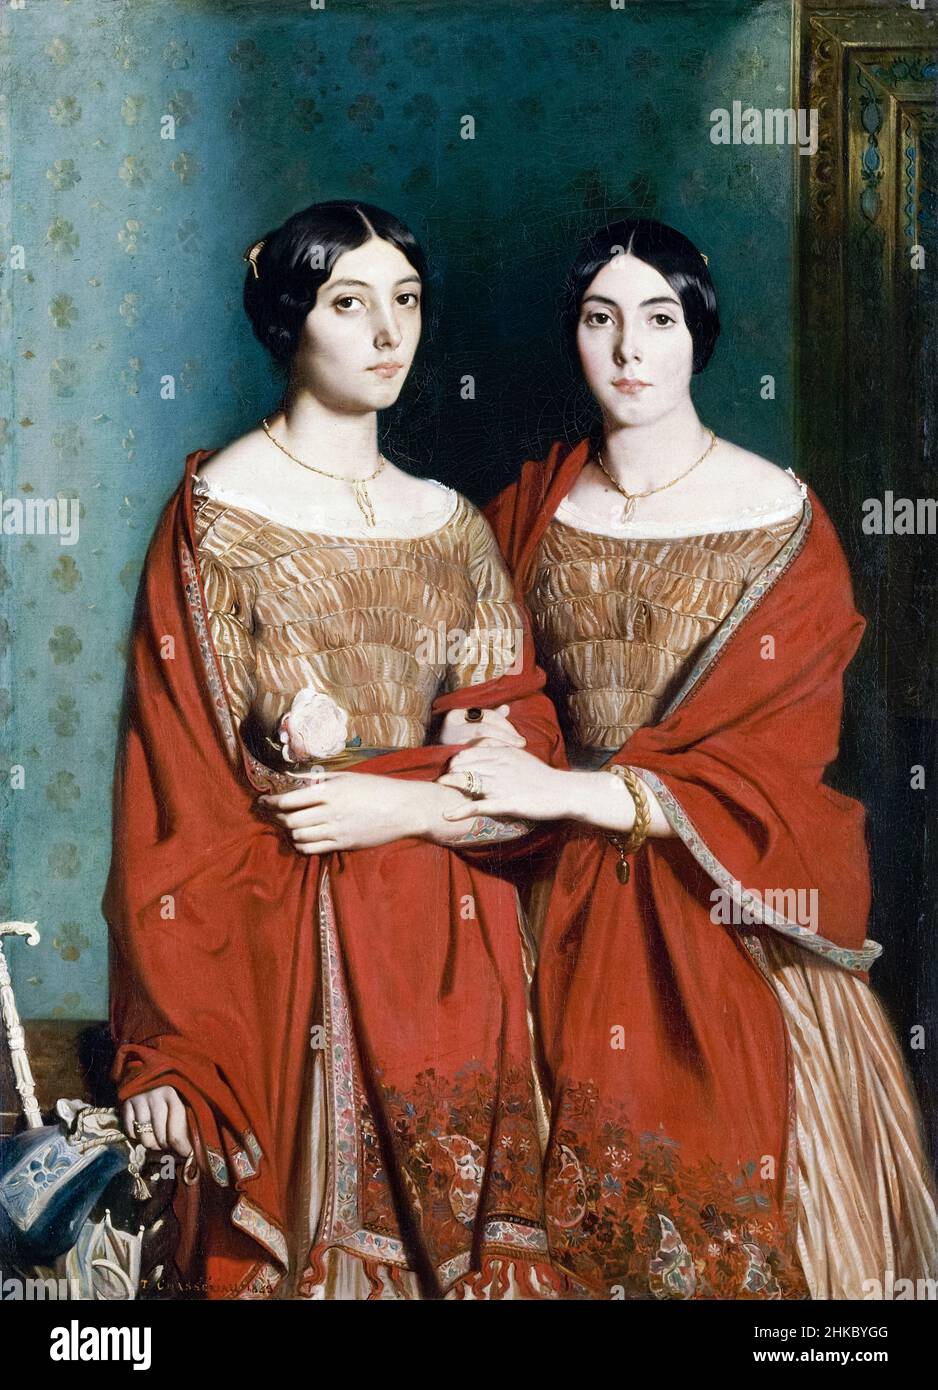 The Two Sisters [Les Deux Sœurs] by French Romantic painter Theodore Chasseriau (1819-1856) portrait of his sisters Adèle and Aline Chasseriau  painted in 1843. Stock Photo